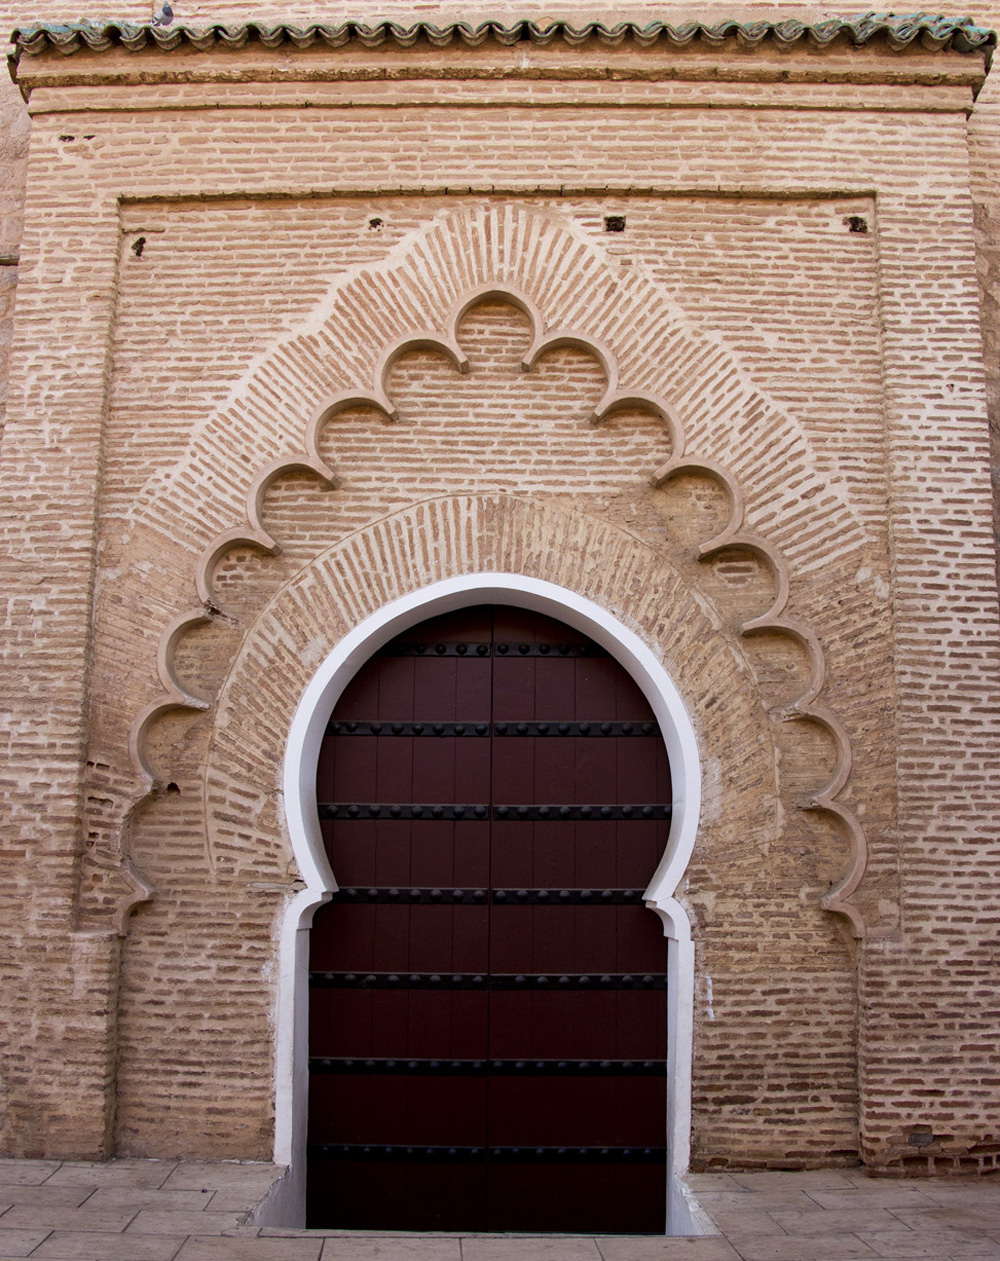 Grand doorway at the Koutoubia Mosque | Marrakech, Morocco